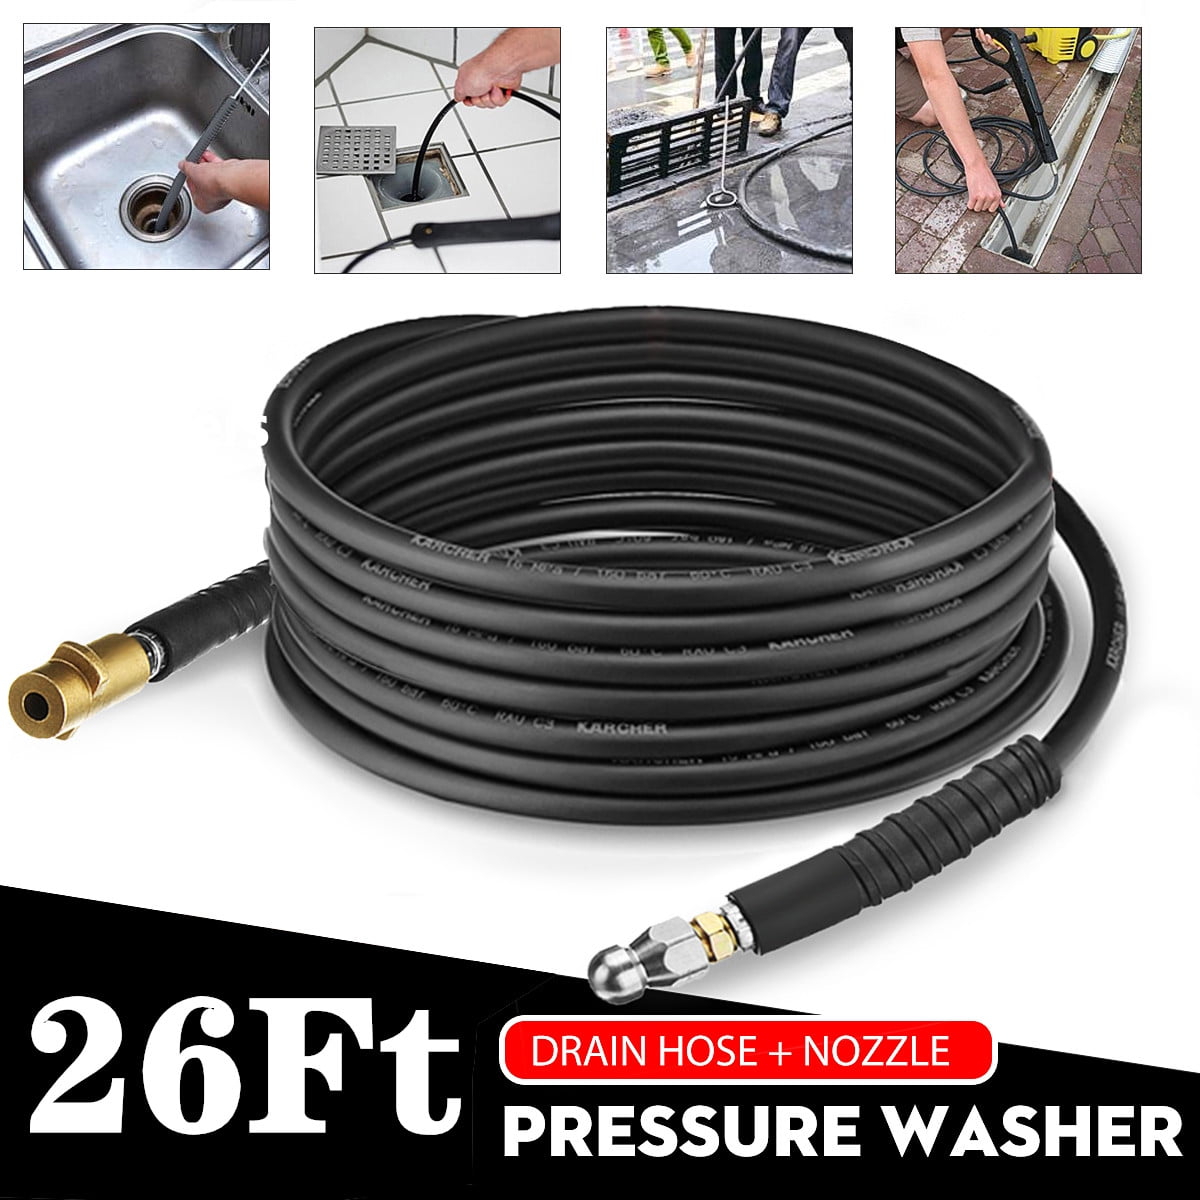 4 M Drain Cleaning Pantalon with rotary Nozzle-KARCHER k2 Series Pressure Washer 